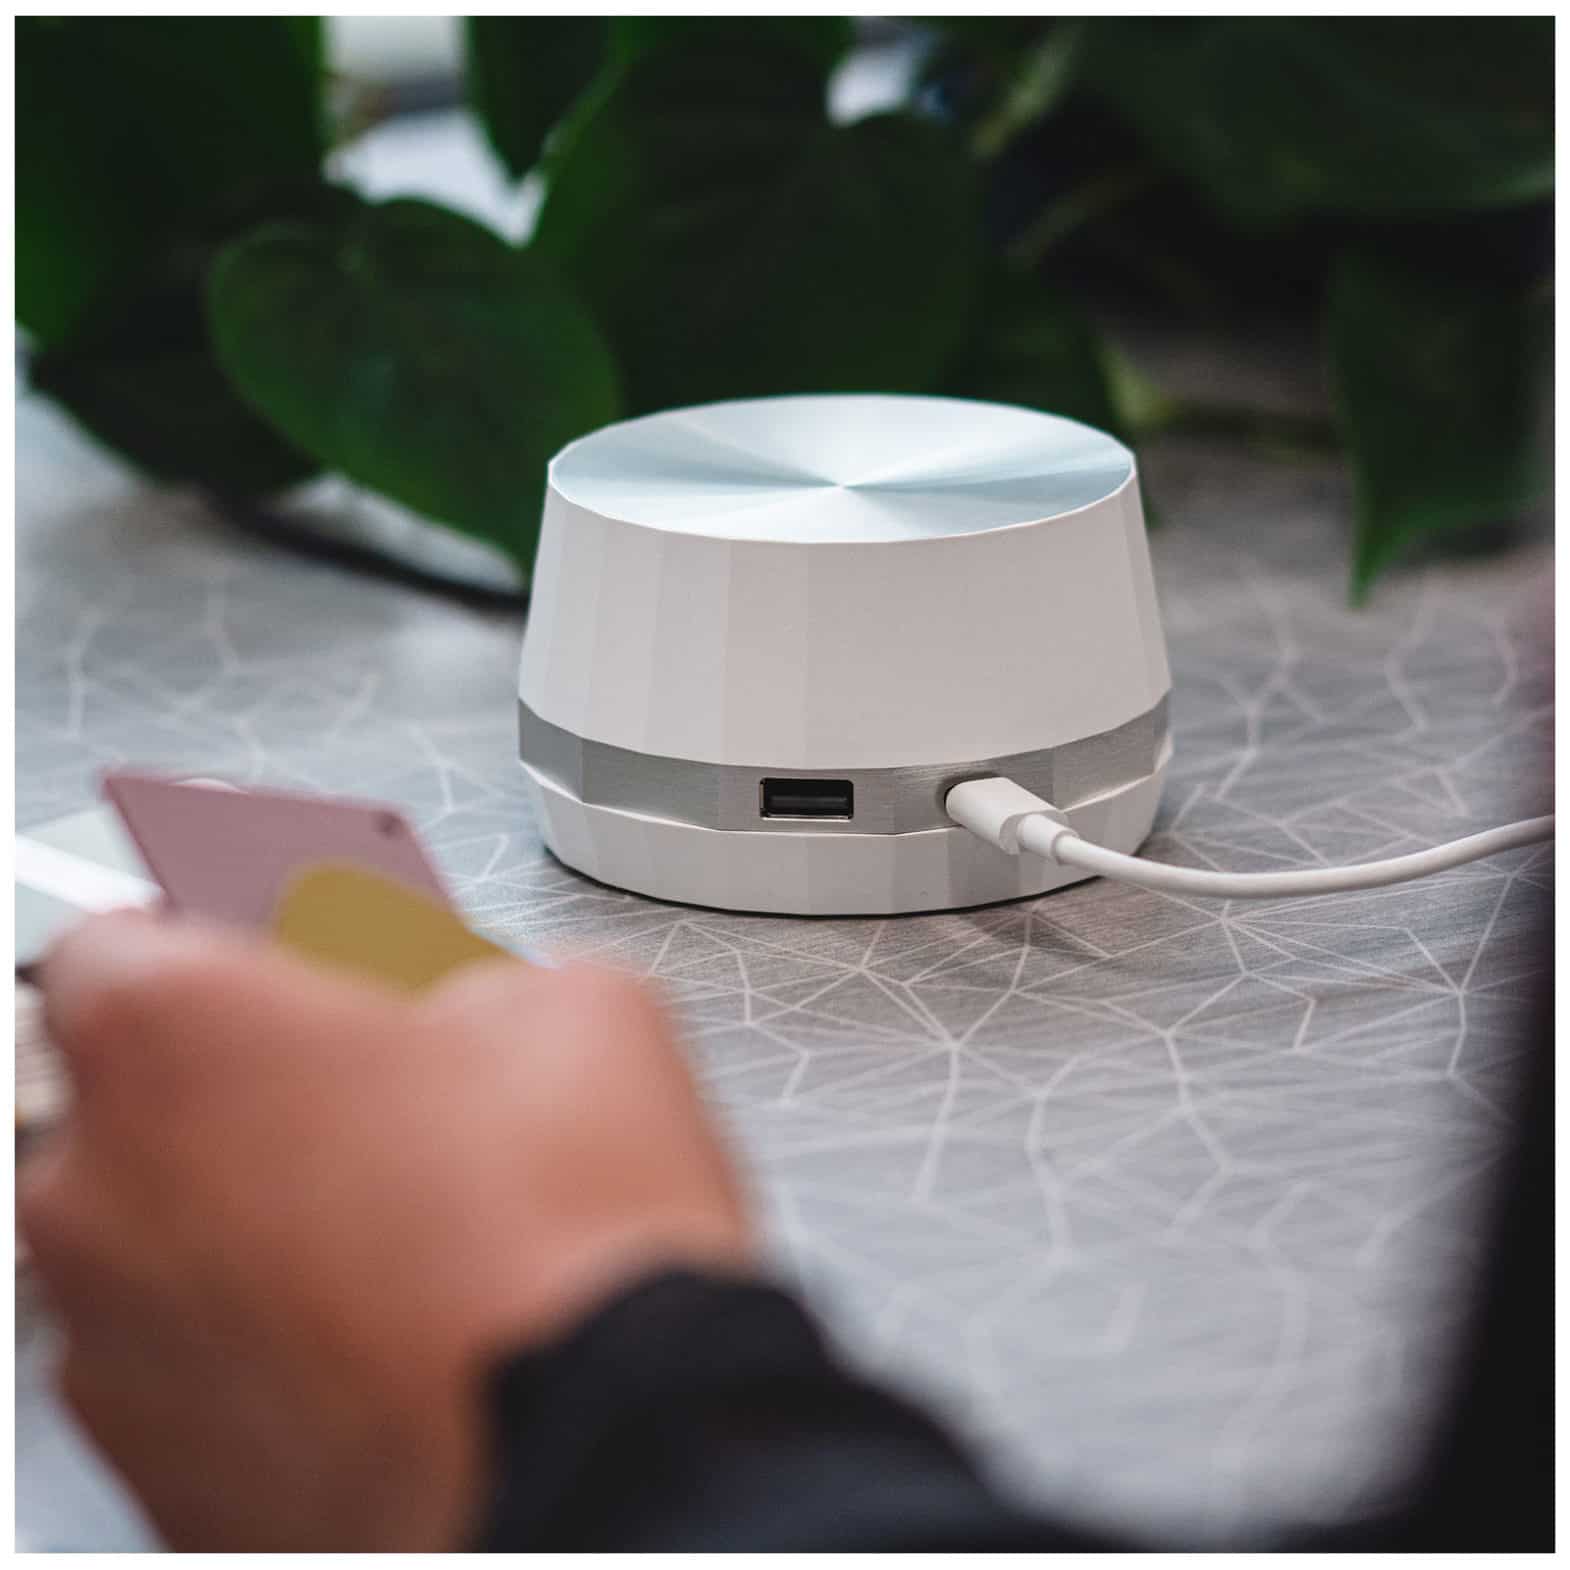 Luna offers the fastest possible charging speed on the market today